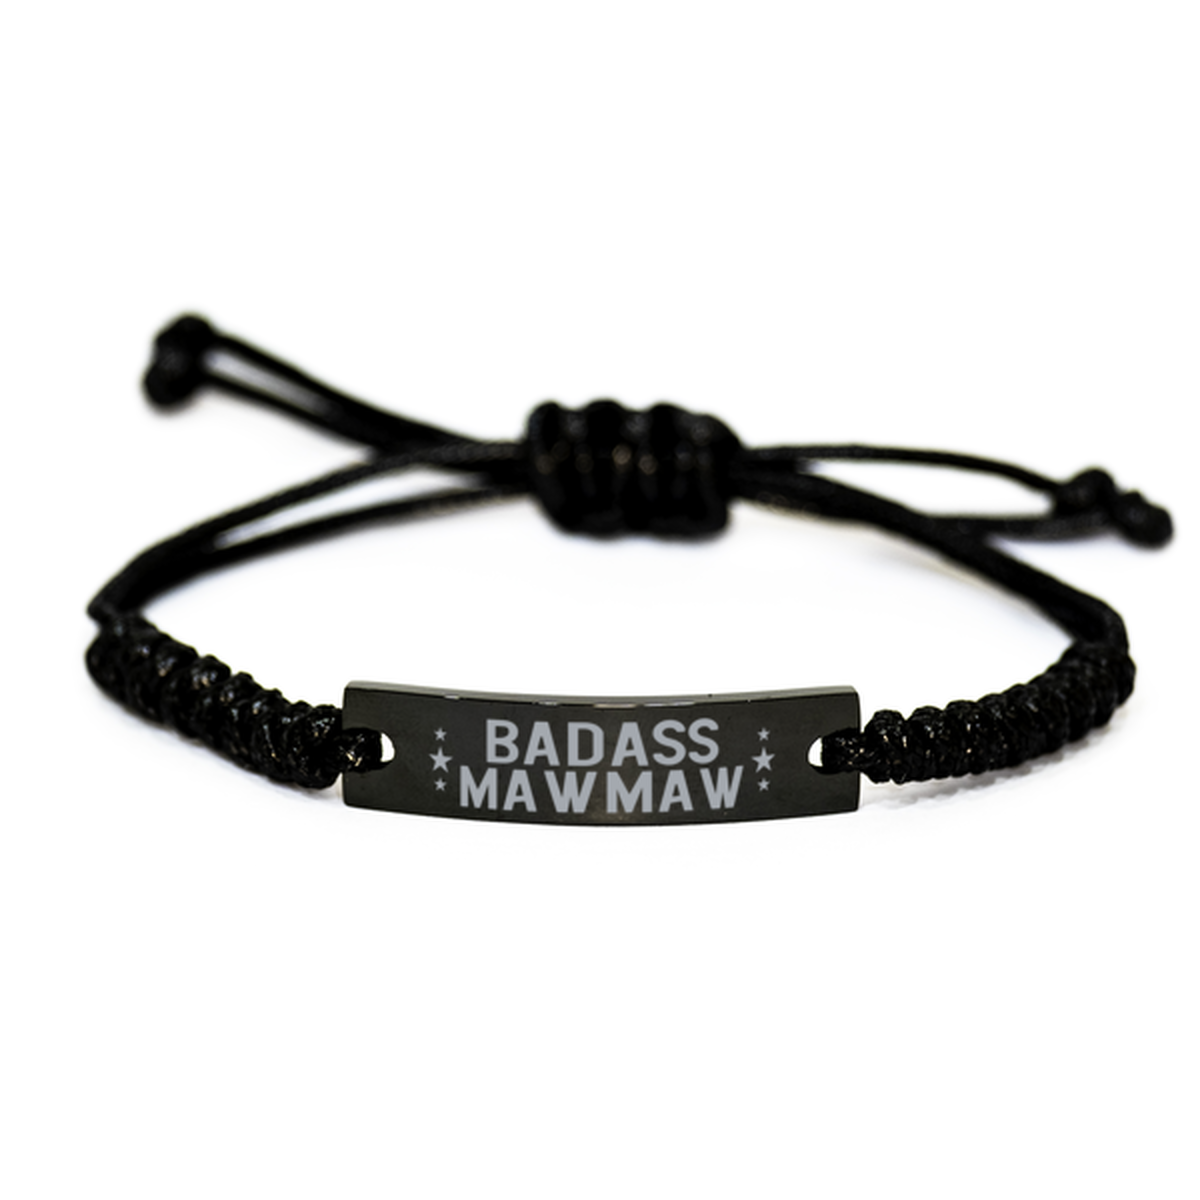 Mawmaw Rope Bracelet, Badass Mawmaw, Funny Family Gifts For Mawmaw From Granddaughter Grandson